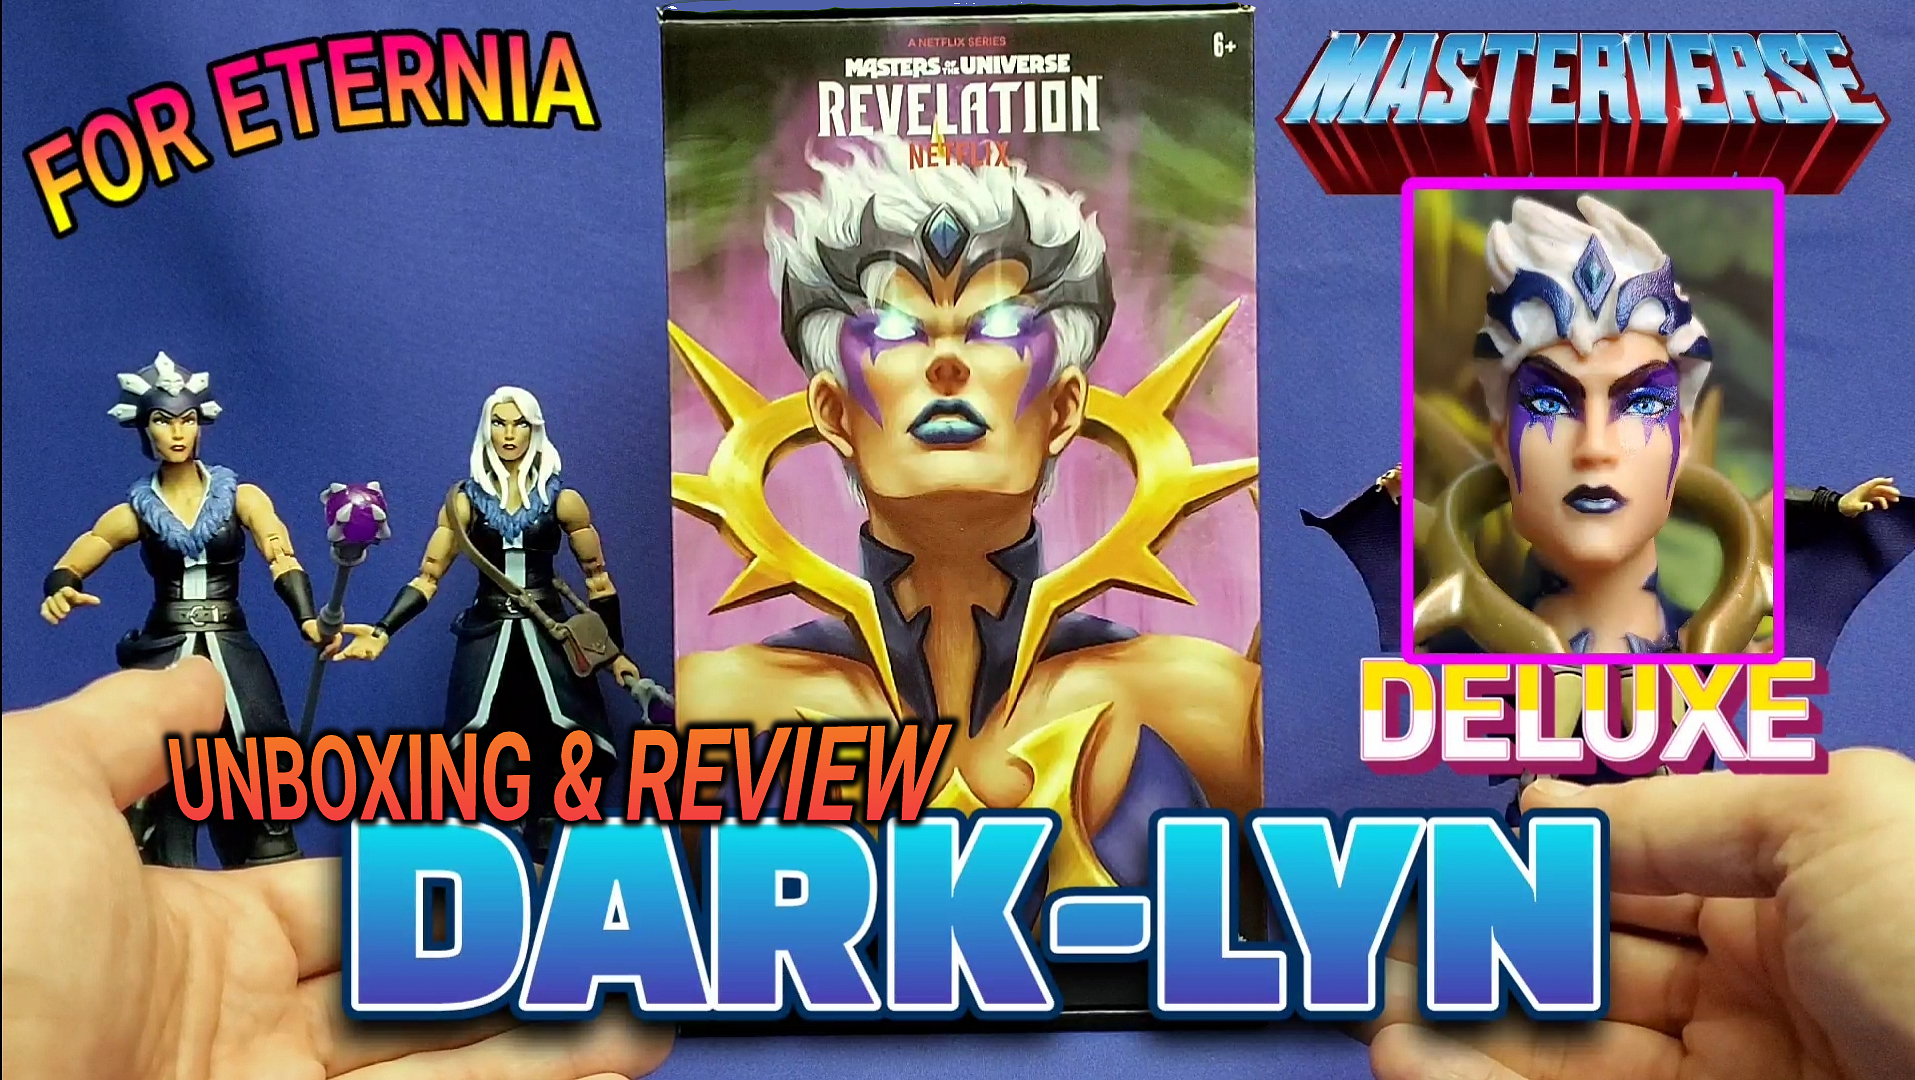 Watch our UNBOXING & REVIEW of Dark-Lyn, the Revelation Deluxe Masterverse Figure